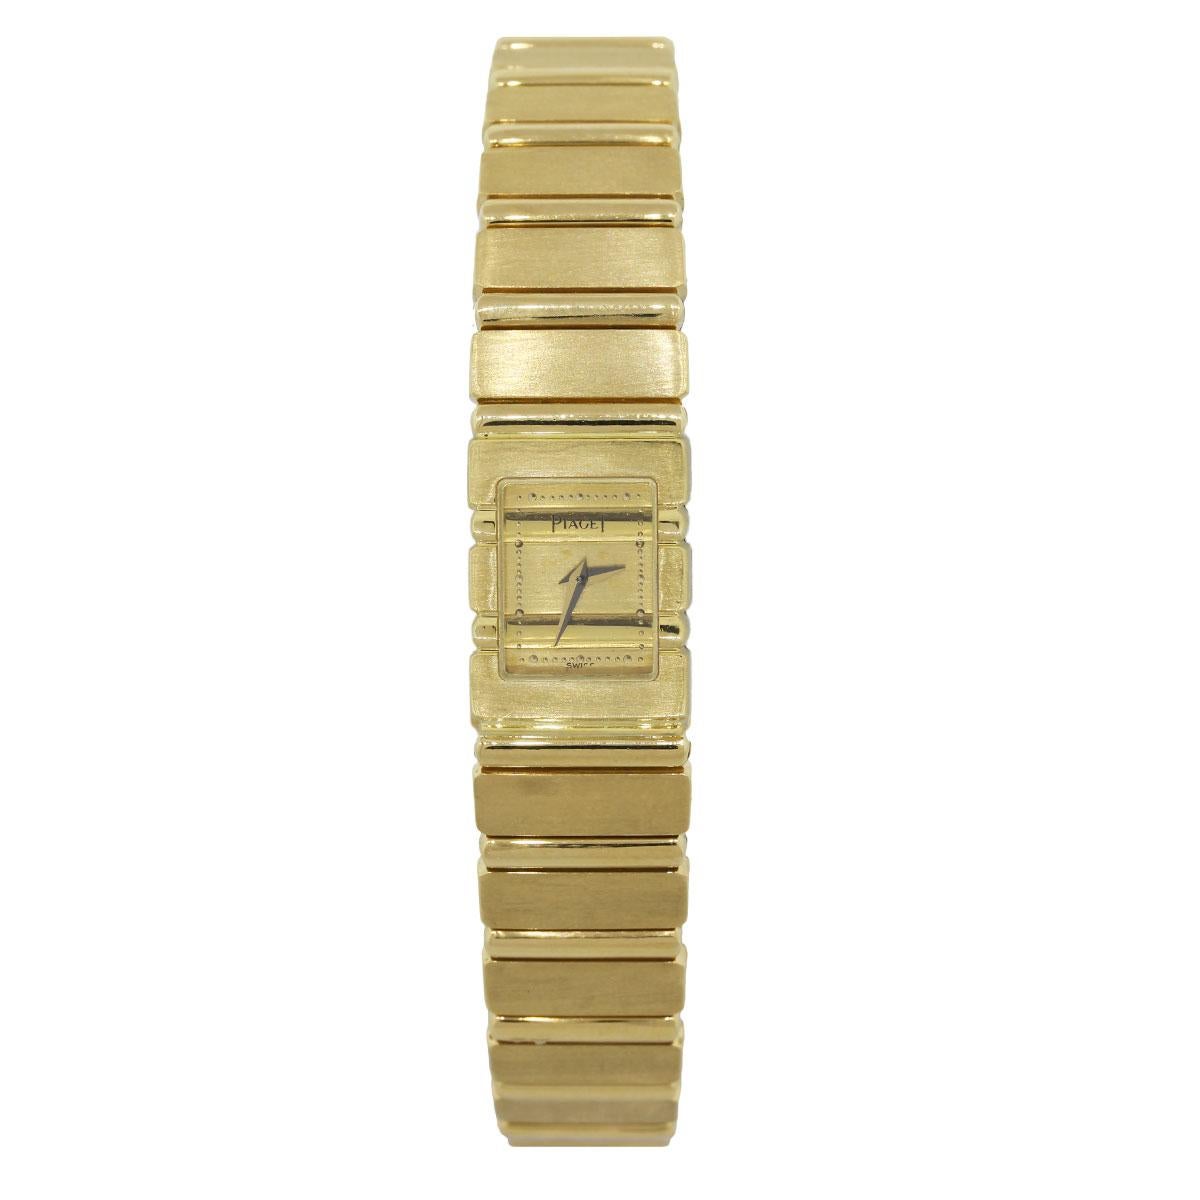 Brand: Piaget
MPN: 15201
Model: Polo
Case Material: 18k yellow gold
Case Diameter: 14mm
Crystal: Sapphire crystal (scratch resistant)
Bezel: 18k yellow gold
Dial: 18k yellow gold dial
Bracelet: 18k yellow gold bracelet
Size: Will fit a 6.25″